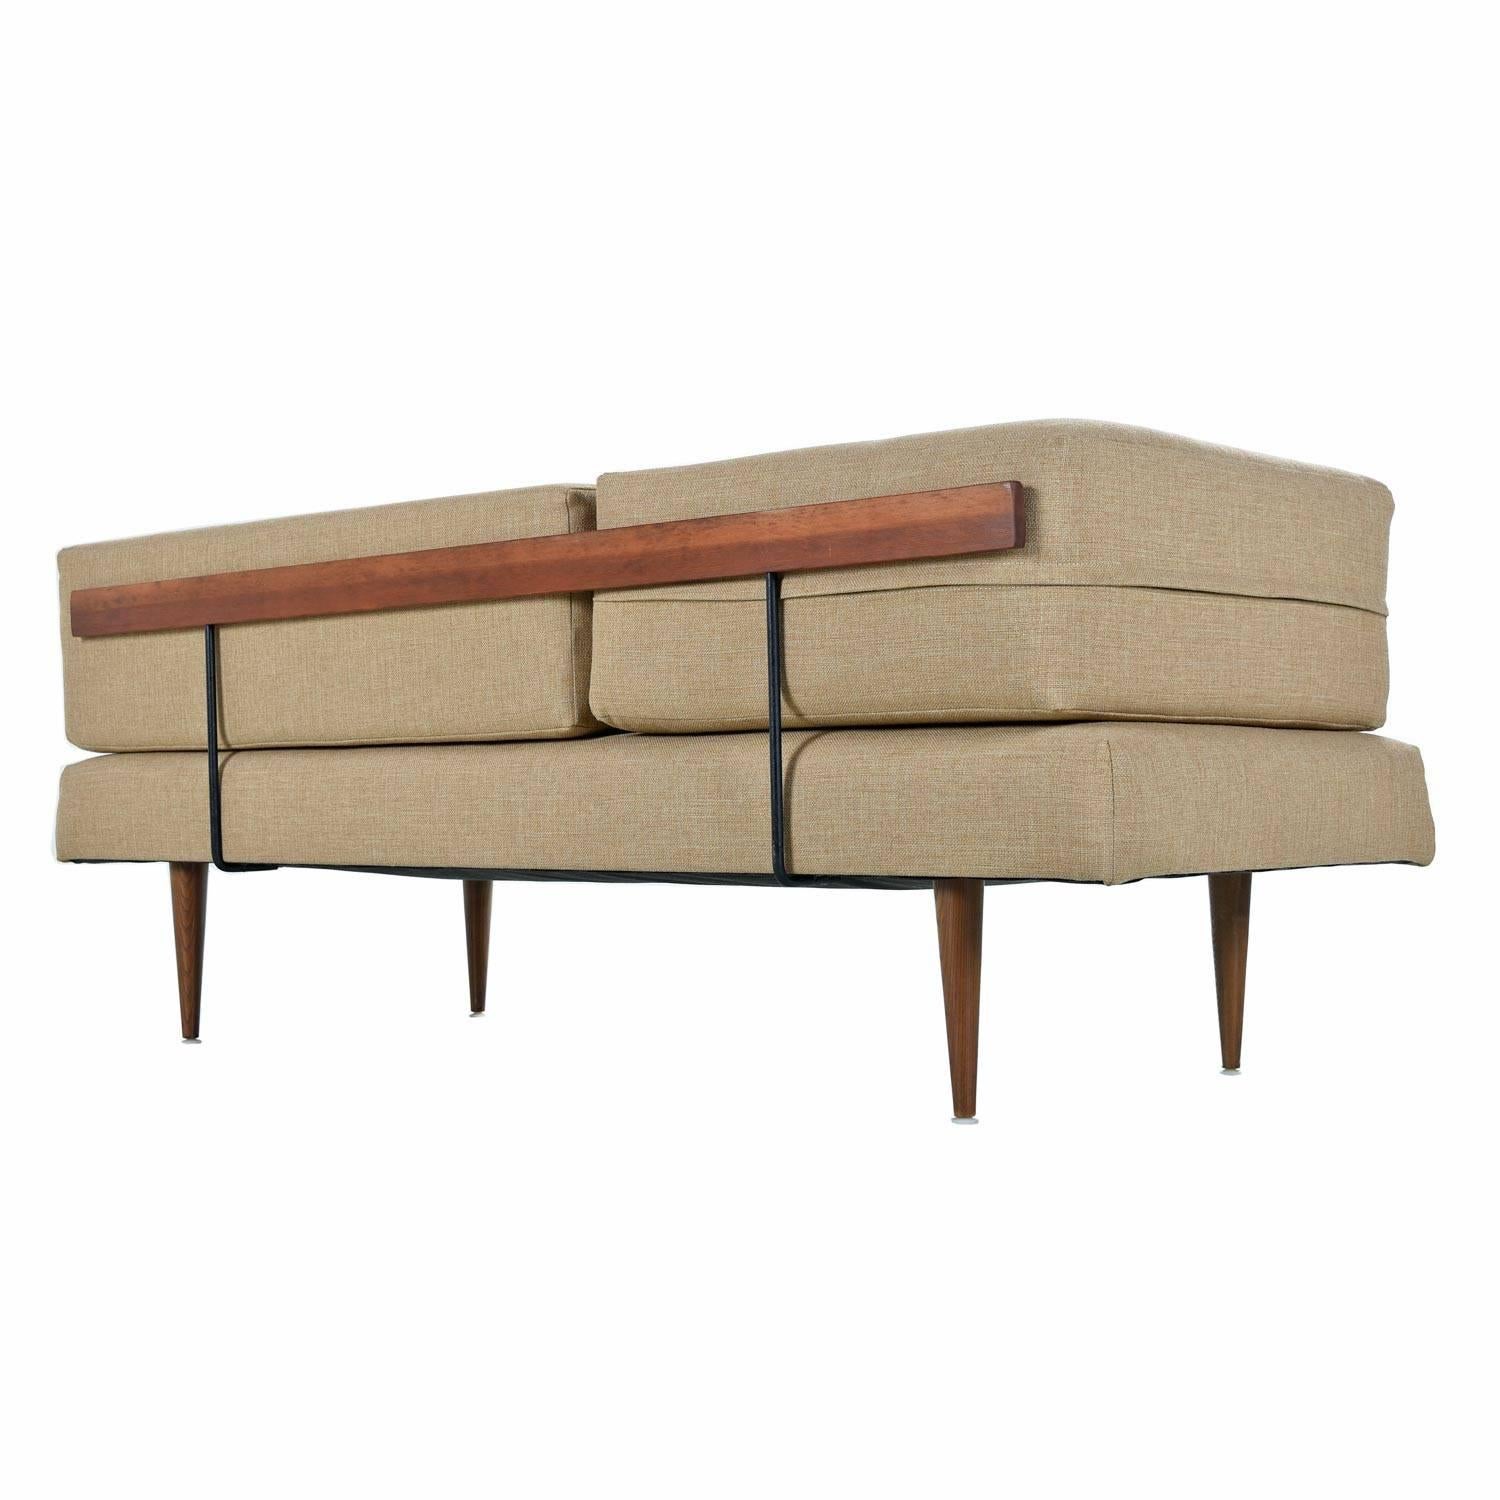 Restored Mid-Century Modern daybed sofa in the style of Peter Hvidt. Unique elbow shaped bolster cushion allows this sofa the fit neatly into a standard 90 degree corner. The sofa does not have to be relegated to the corner. This stylish daybed is